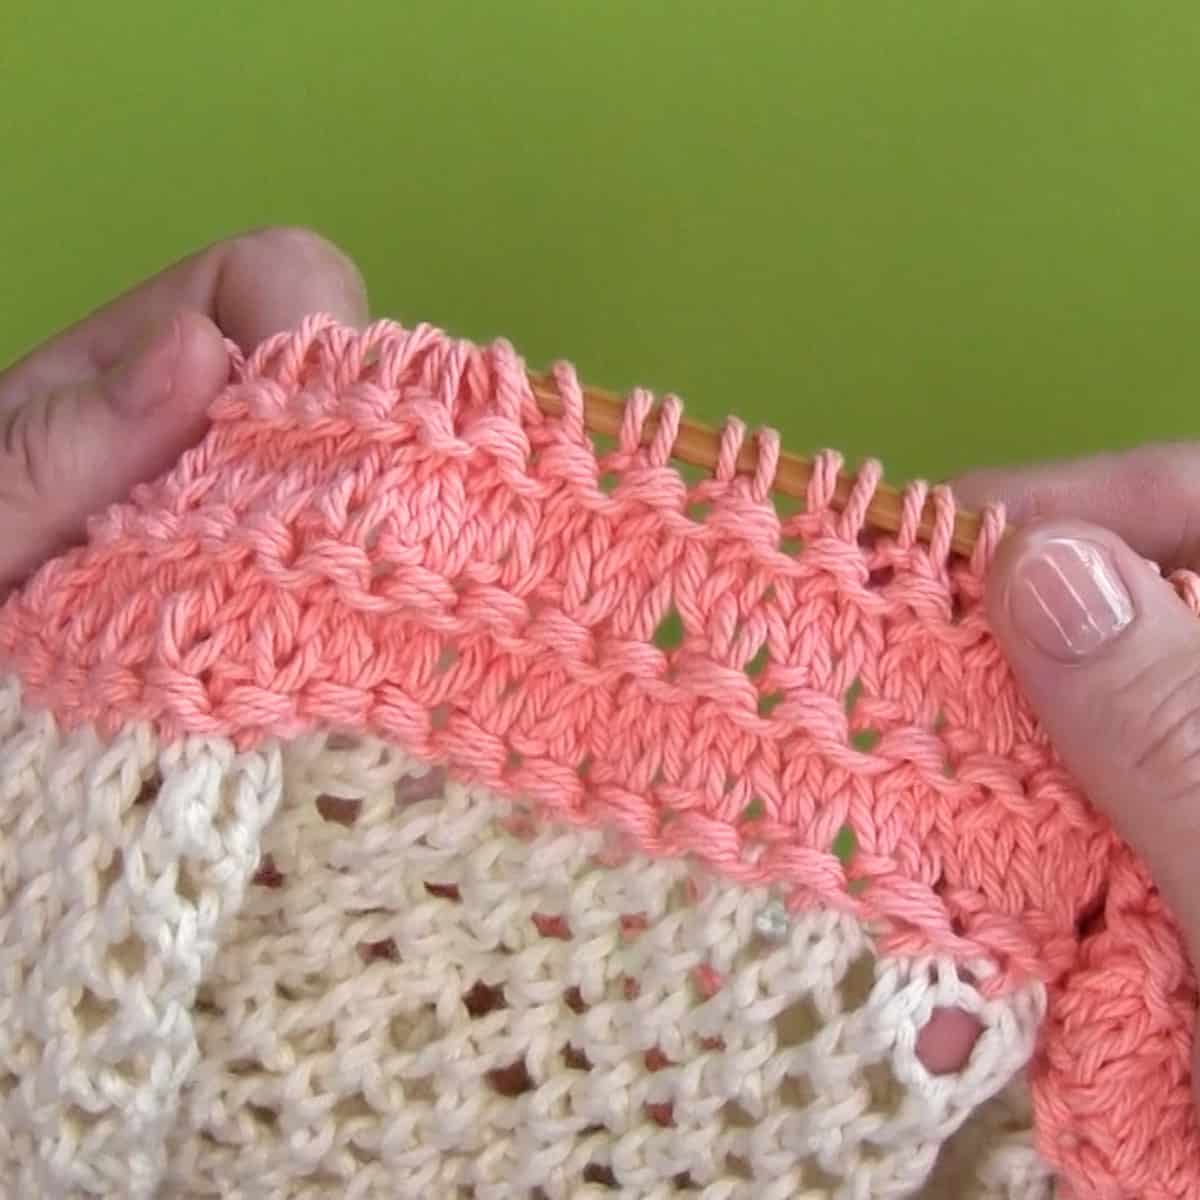 Knitting the top of a mesh bag in granite stitch.